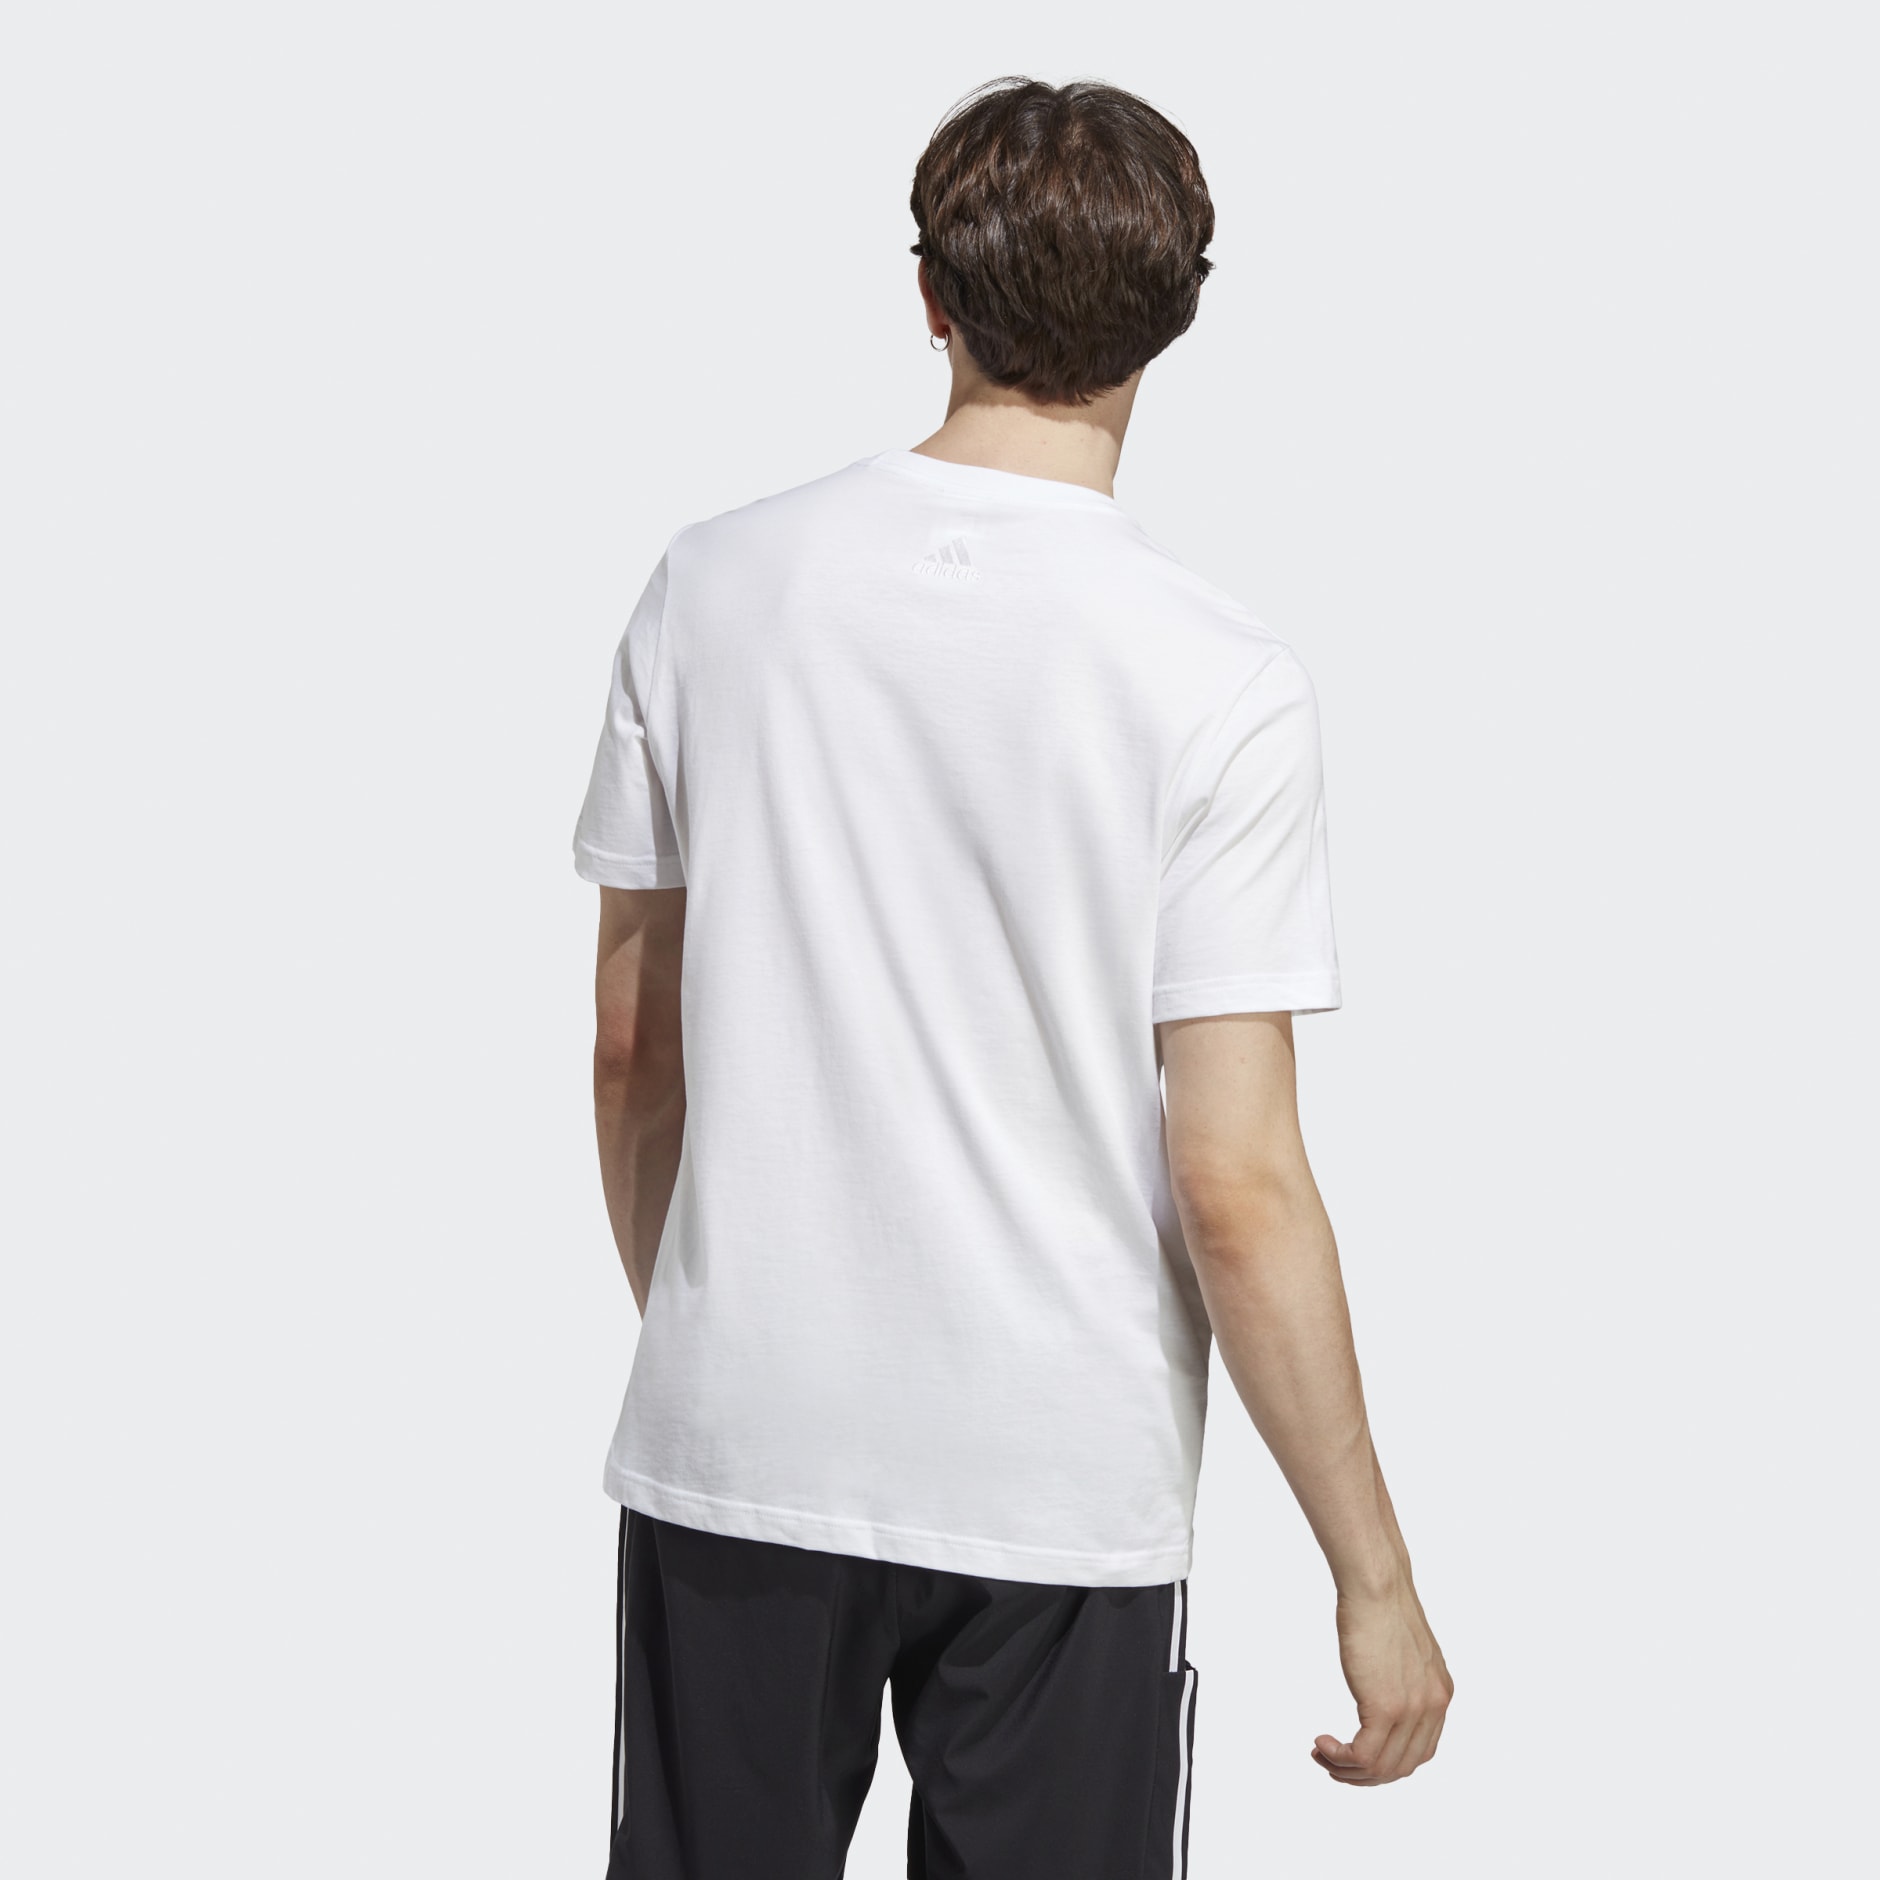 Linear Single Tee Essentials Jersey Logo adidas | GH adidas Embroidered - White